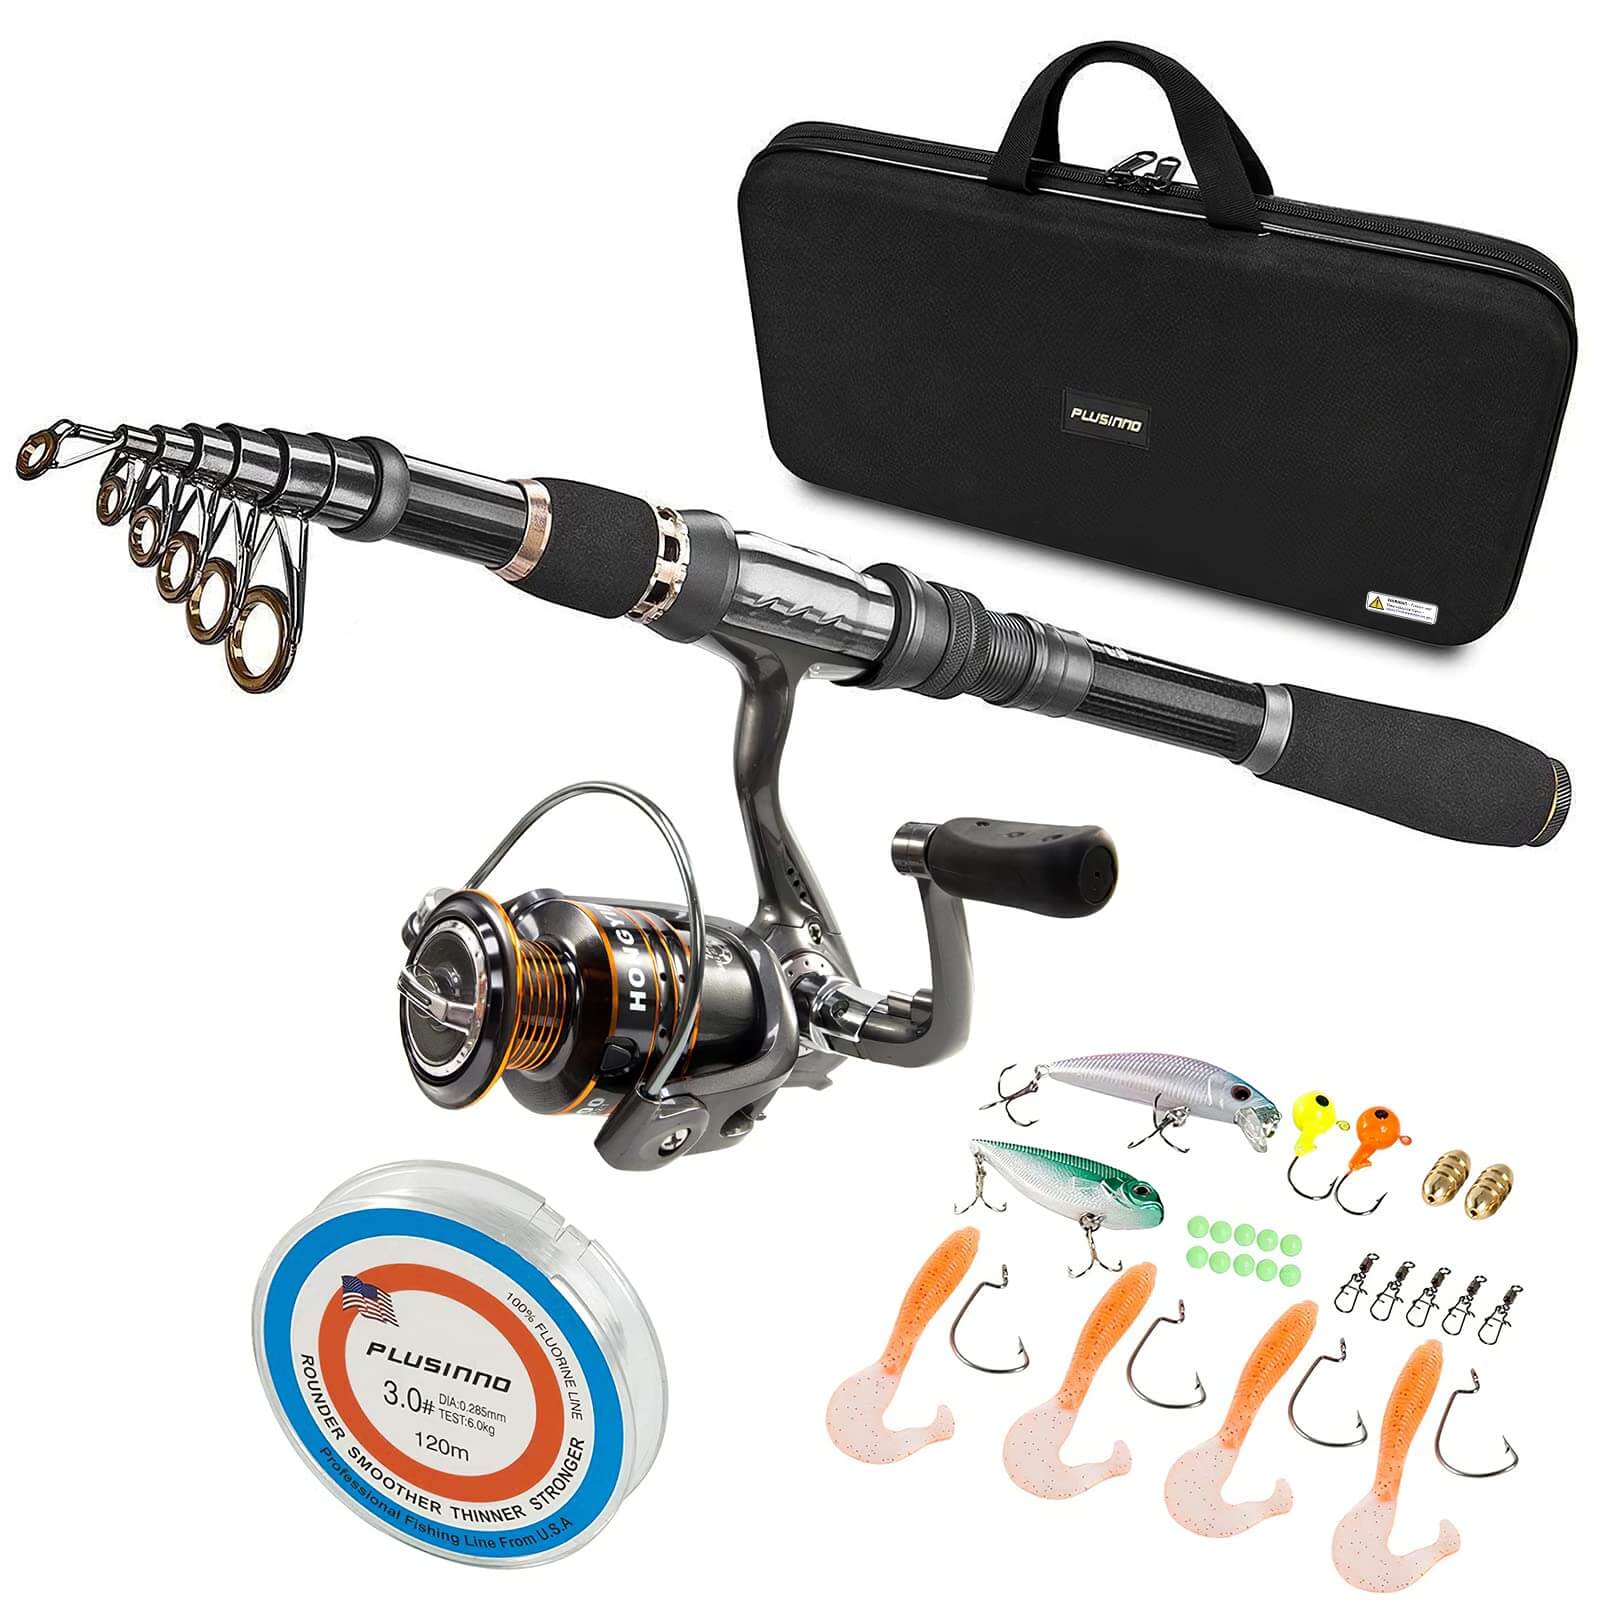  PLUSINNO Fishing Rod and Reel Combos Set,Telescopic Fishing  Pole with Spinning Reels, Carbon Fiber Fishing Rod for Travel Saltwater  Freshwater Fishing : Sports & Outdoors